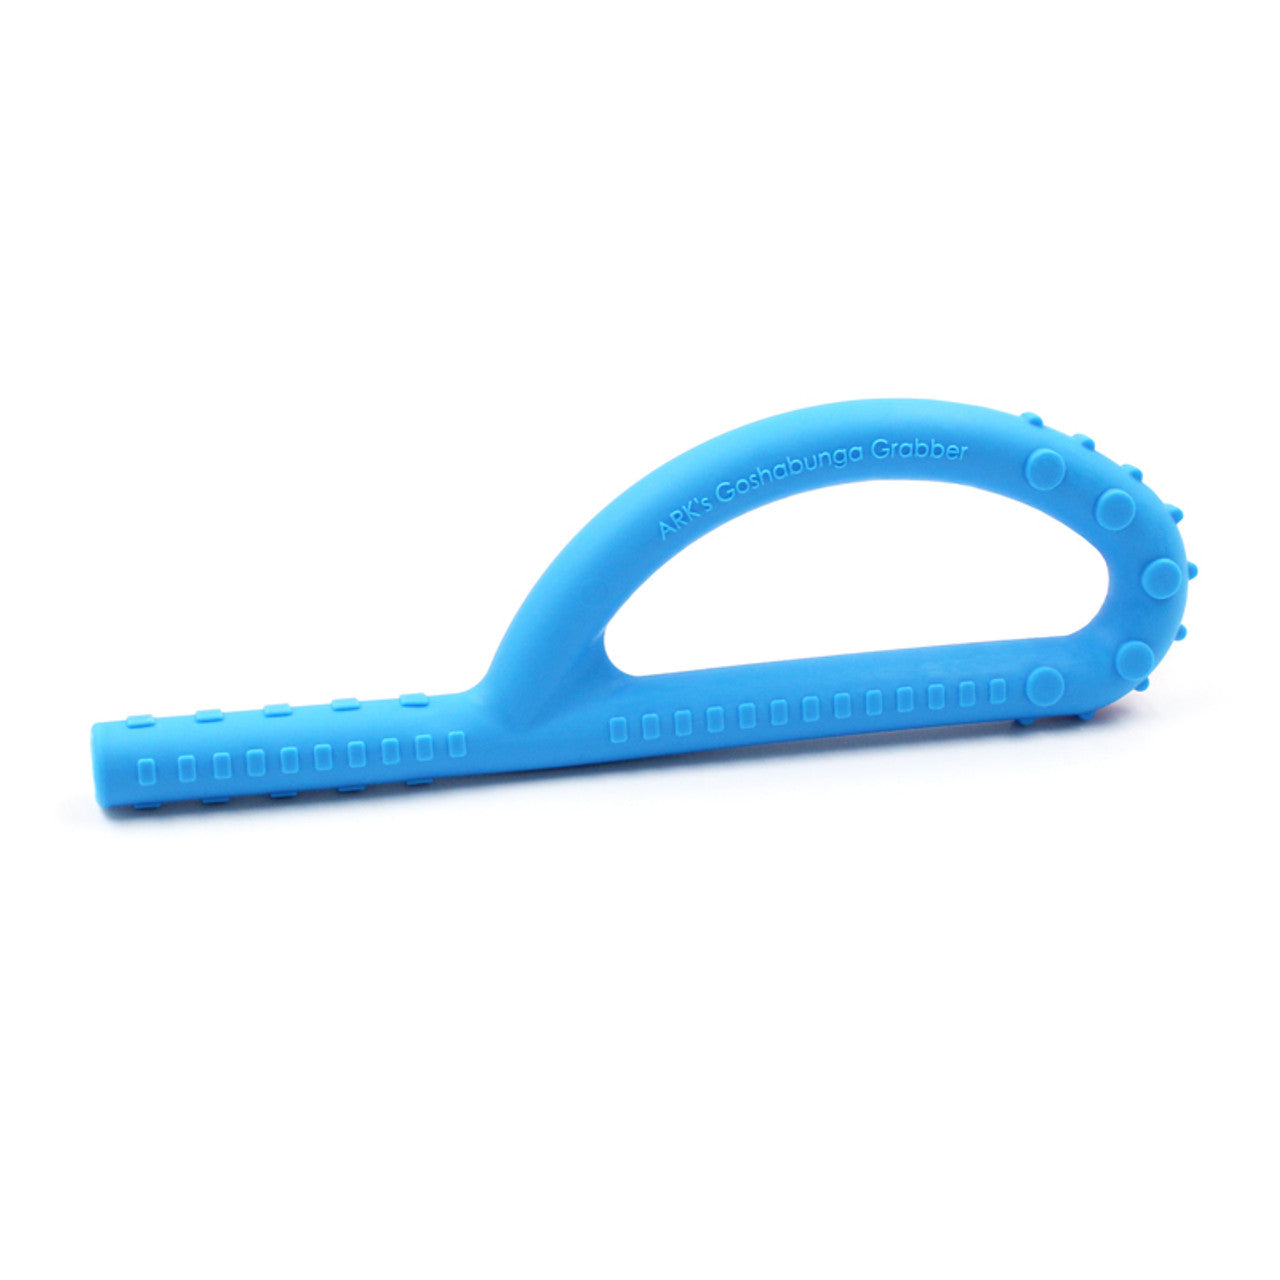 Large Hollow Chewable Handheld Textured Grabber